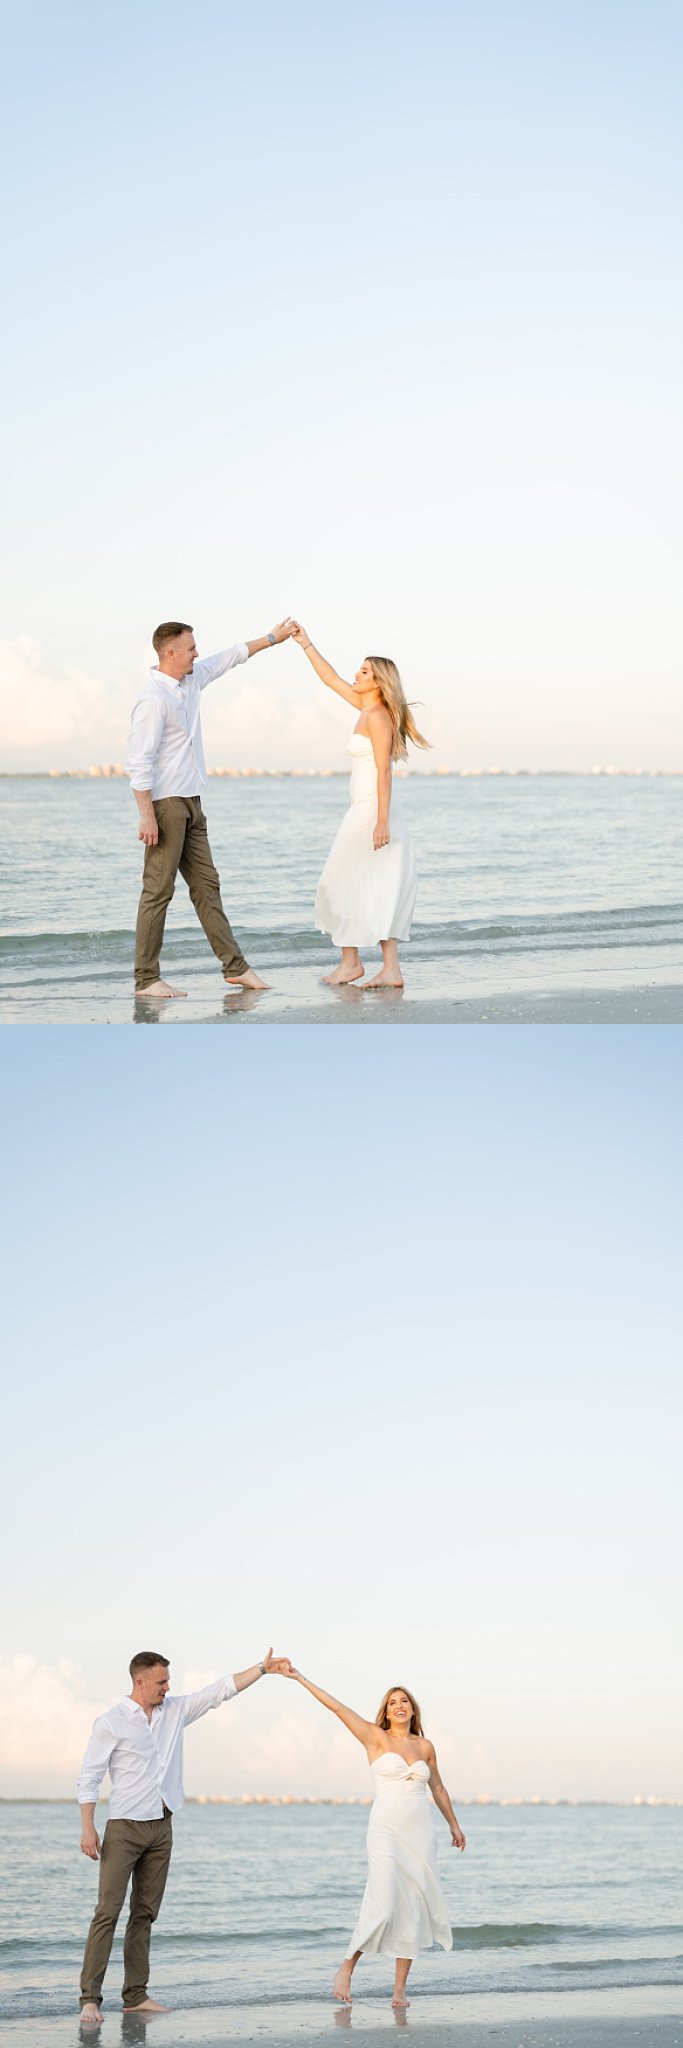 Southwest Florida beach photo session engaged couple dances at the water's edge